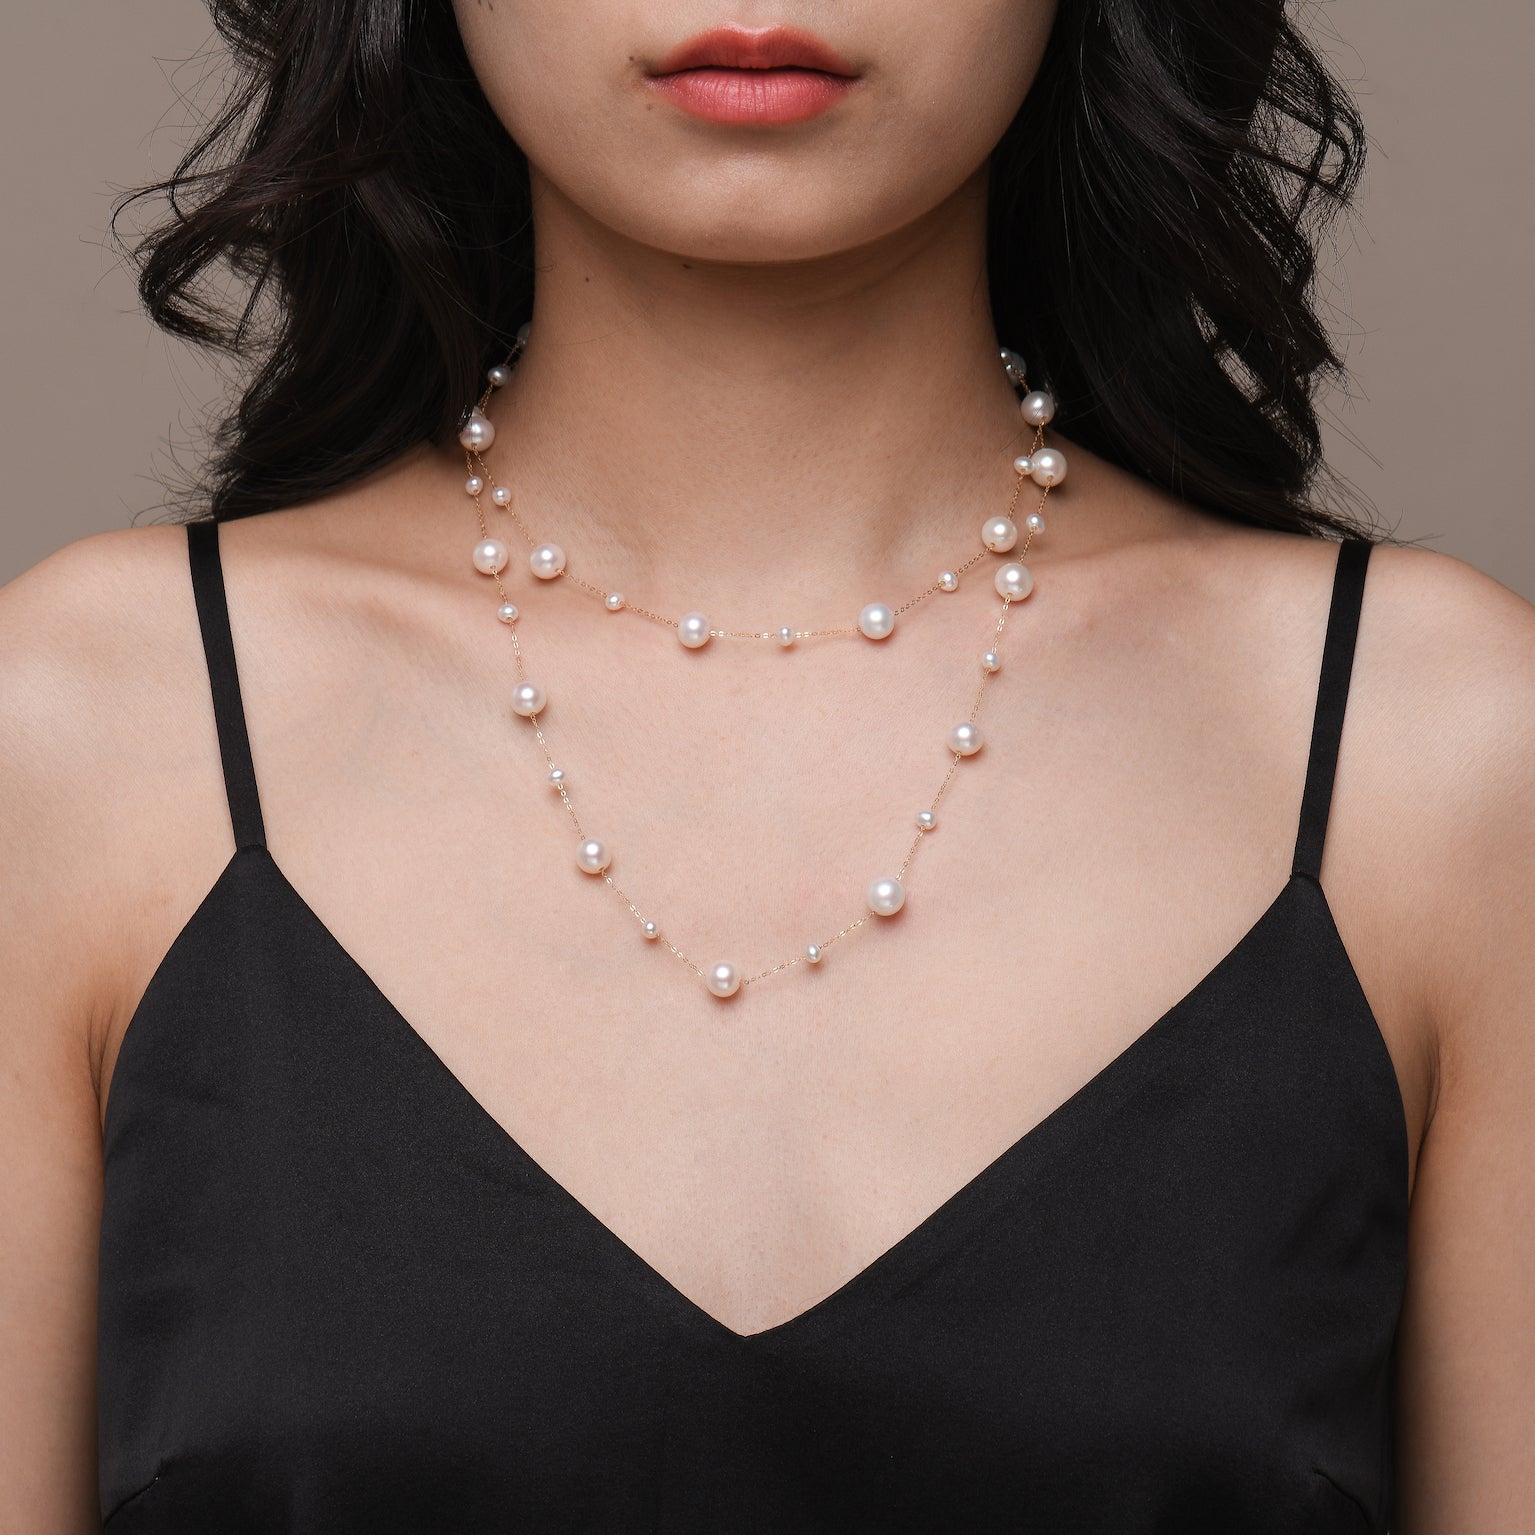 Long freshwater pearl and solid gold necklace